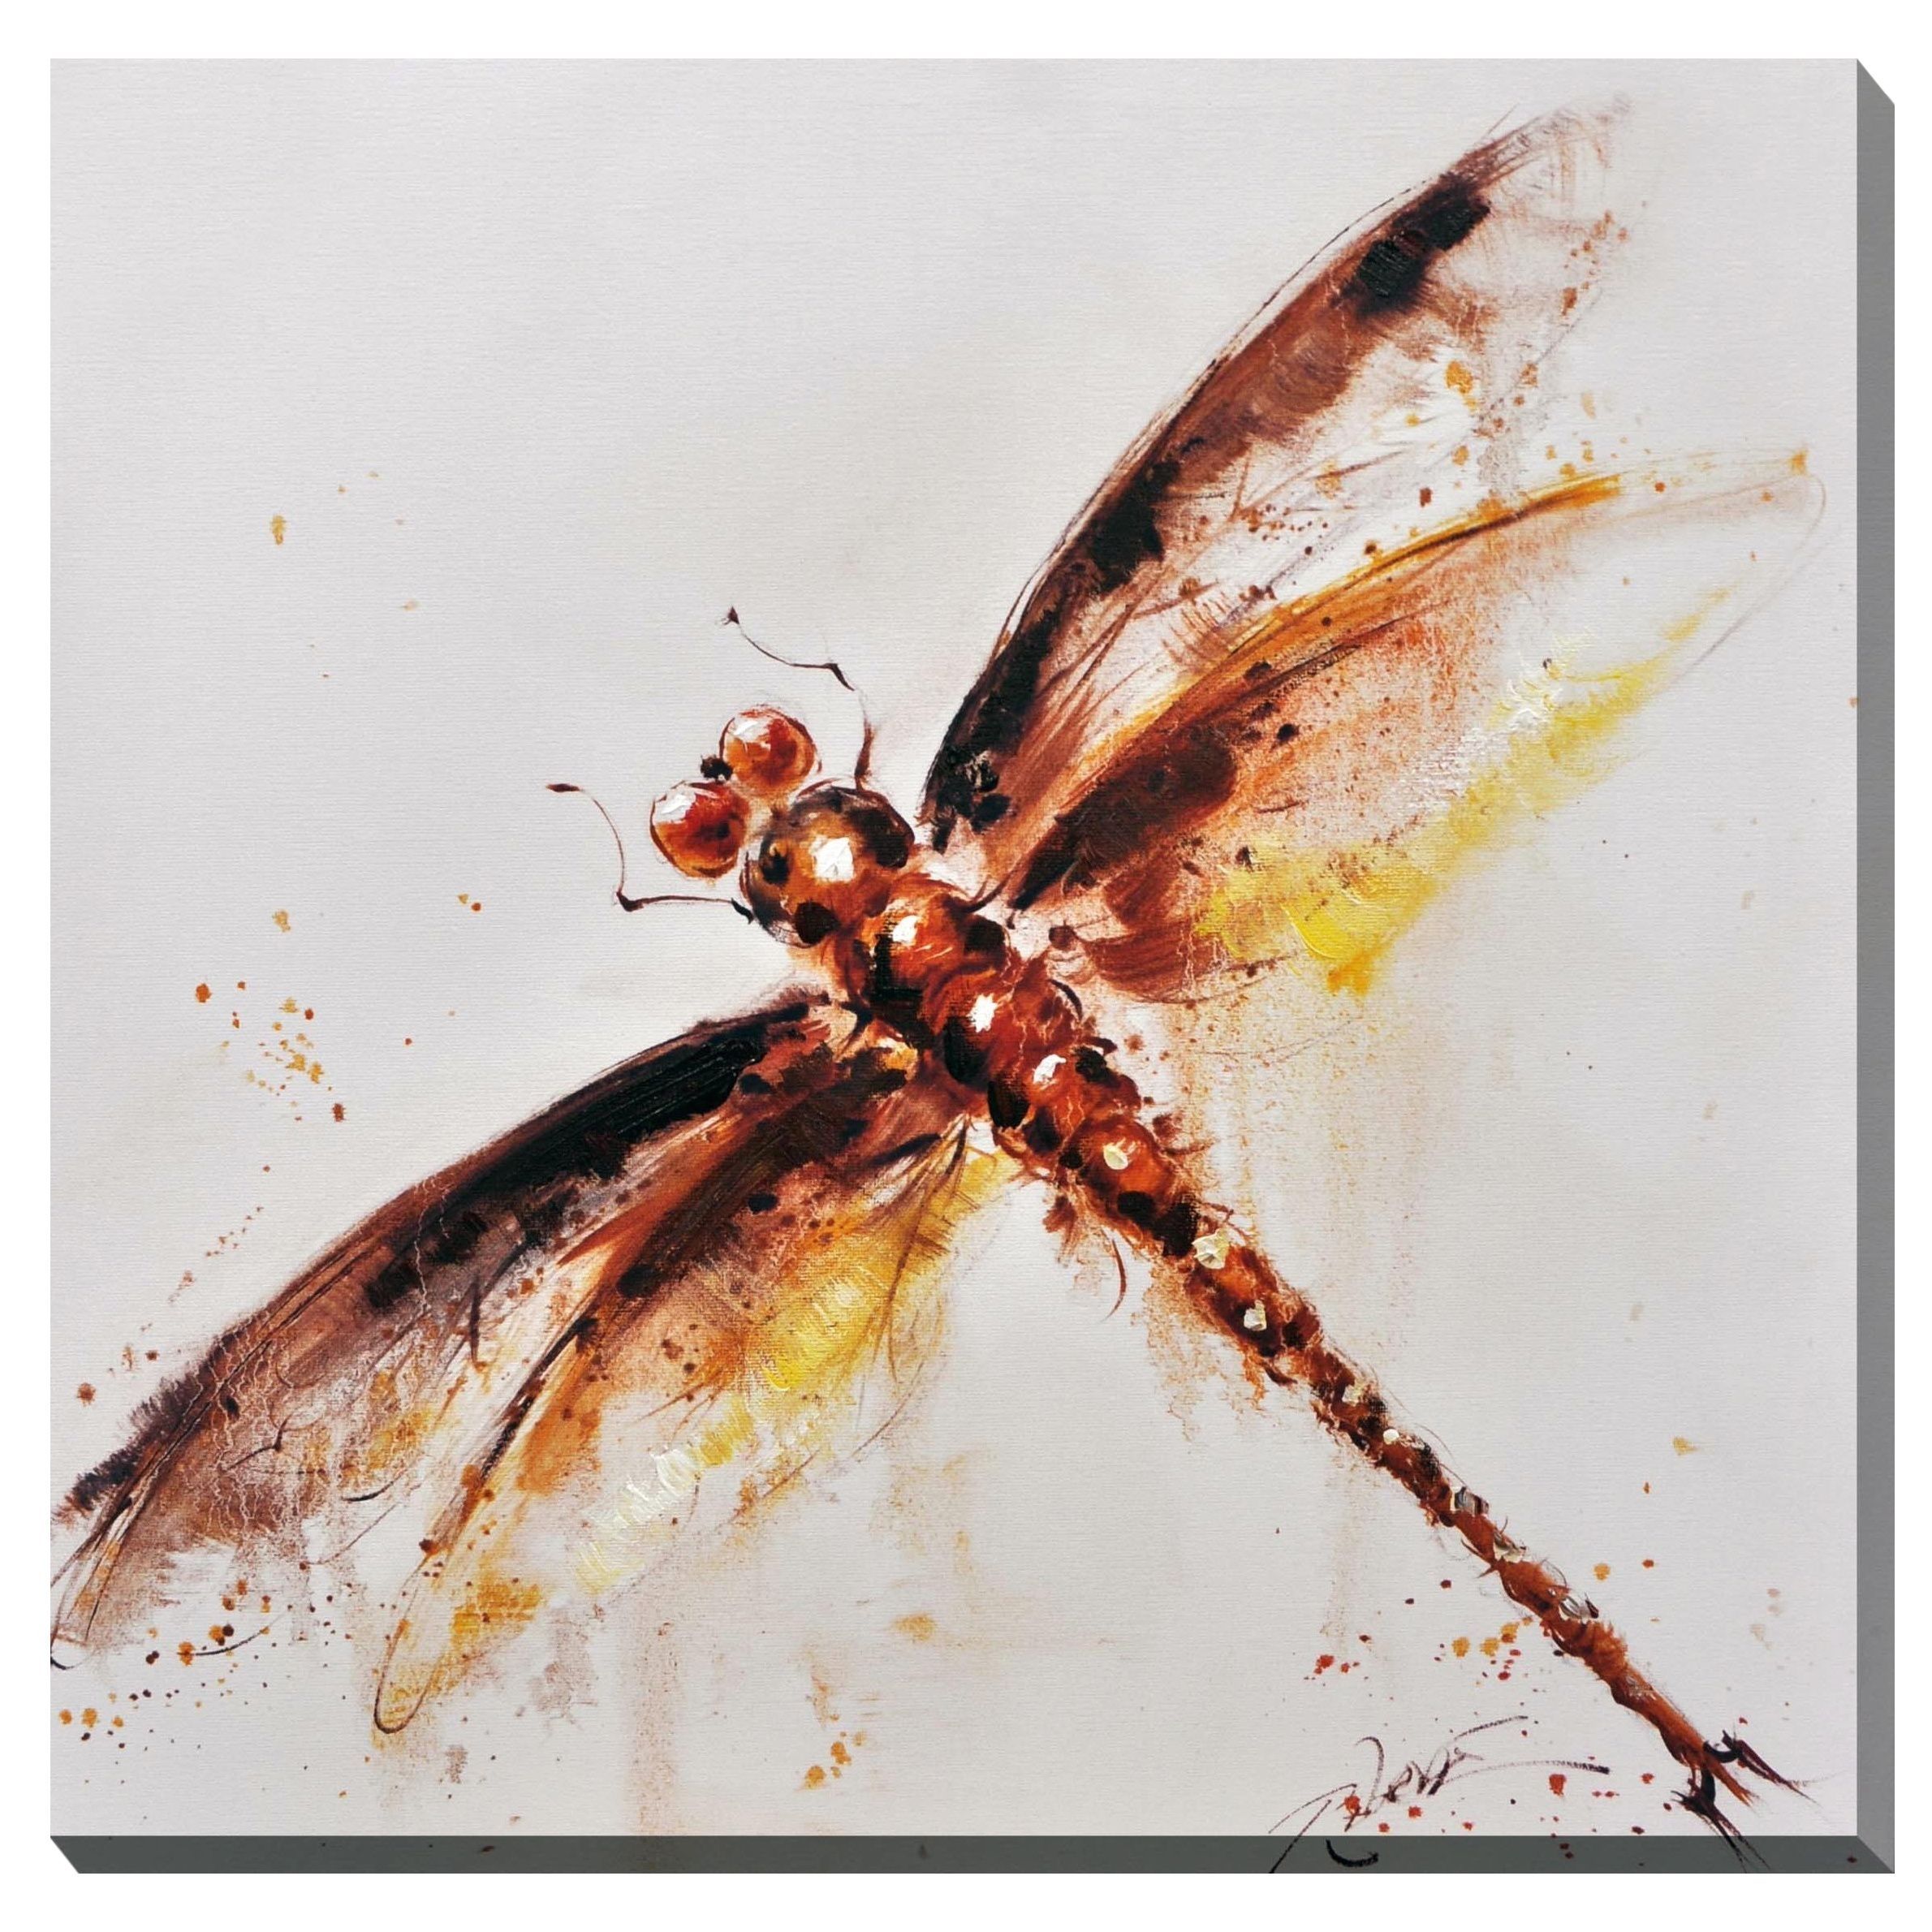 Porthos Home Dragonfly Canvas Print Wall Art | Water Colours In Dragonfly Painting Wall Art (View 16 of 20)